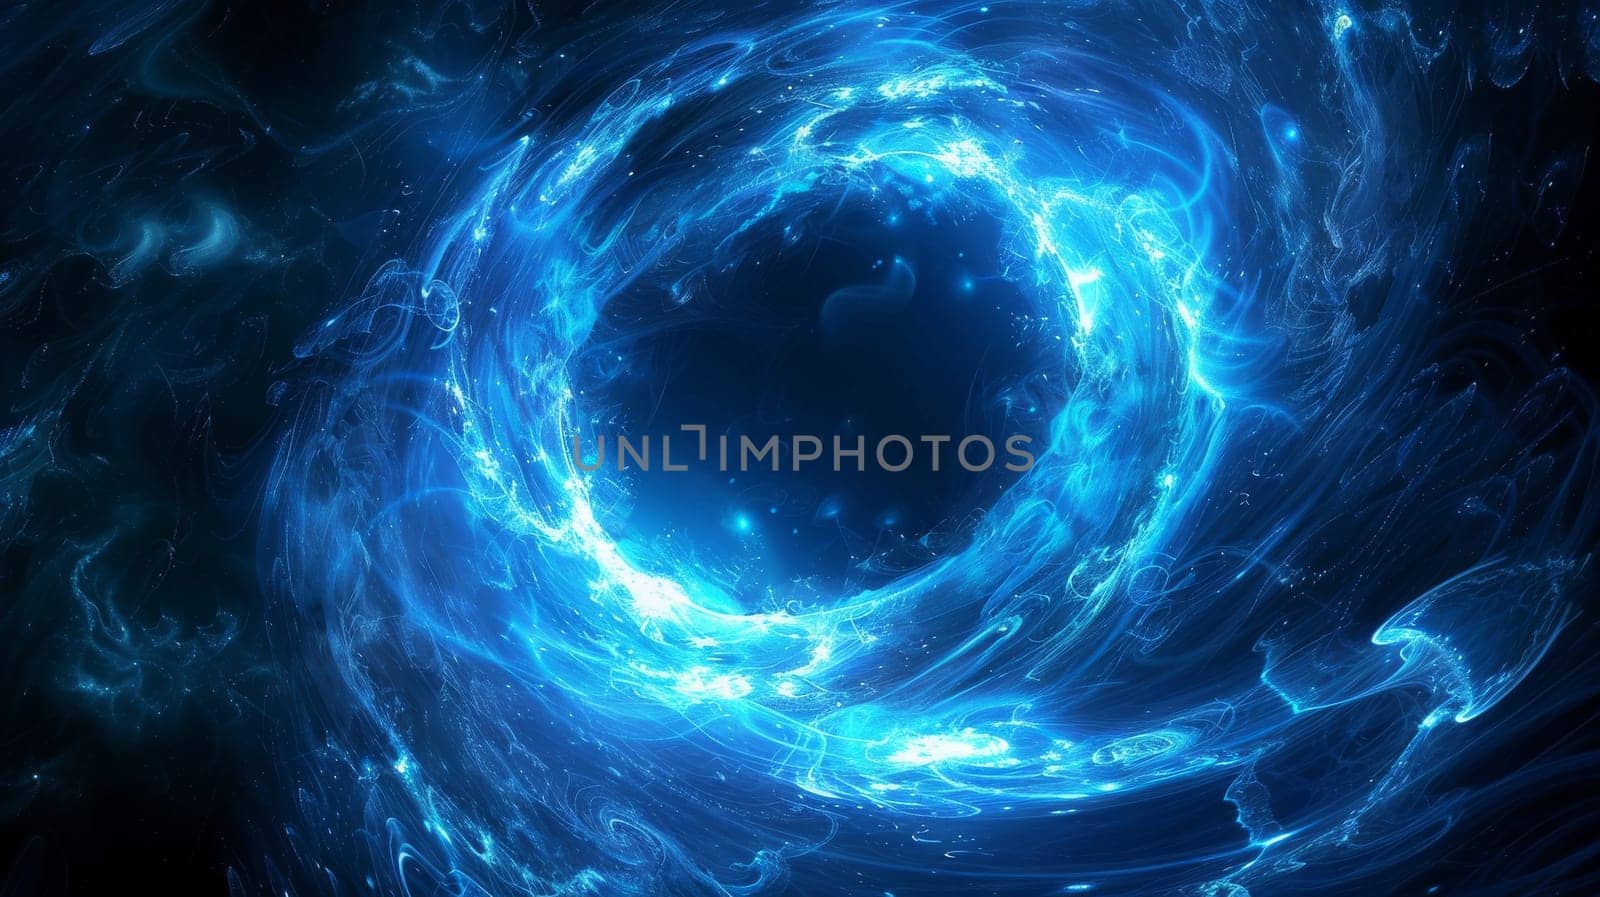 A blue and white space with a large hole in the middle. The blue color is very bright and the white color is very bright as well